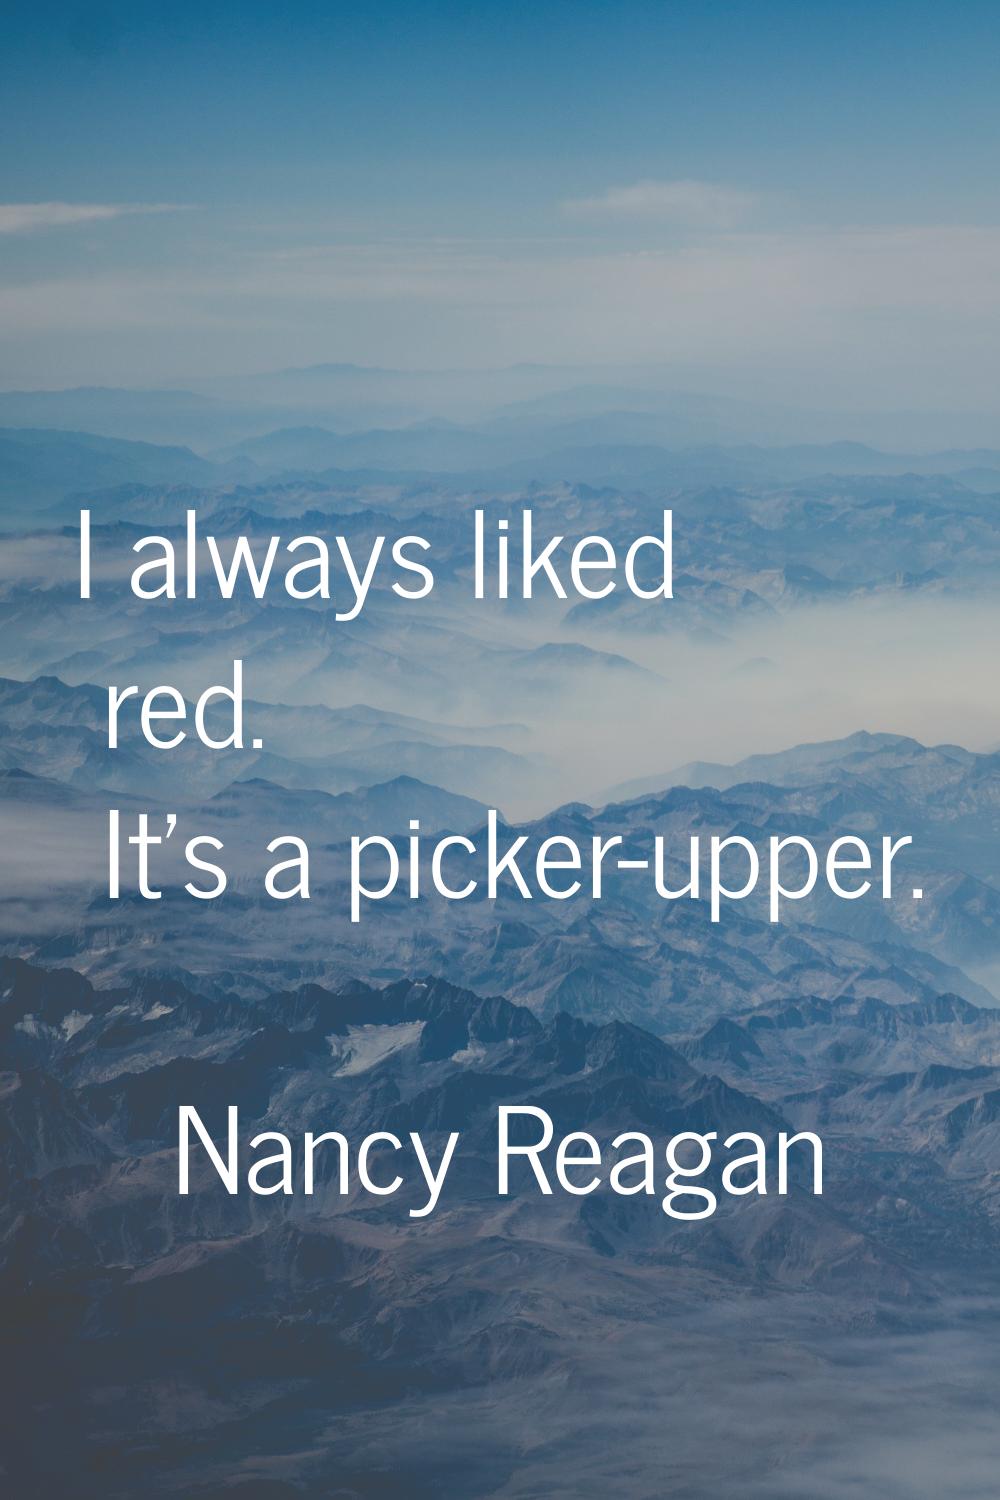 I always liked red. It's a picker-upper.